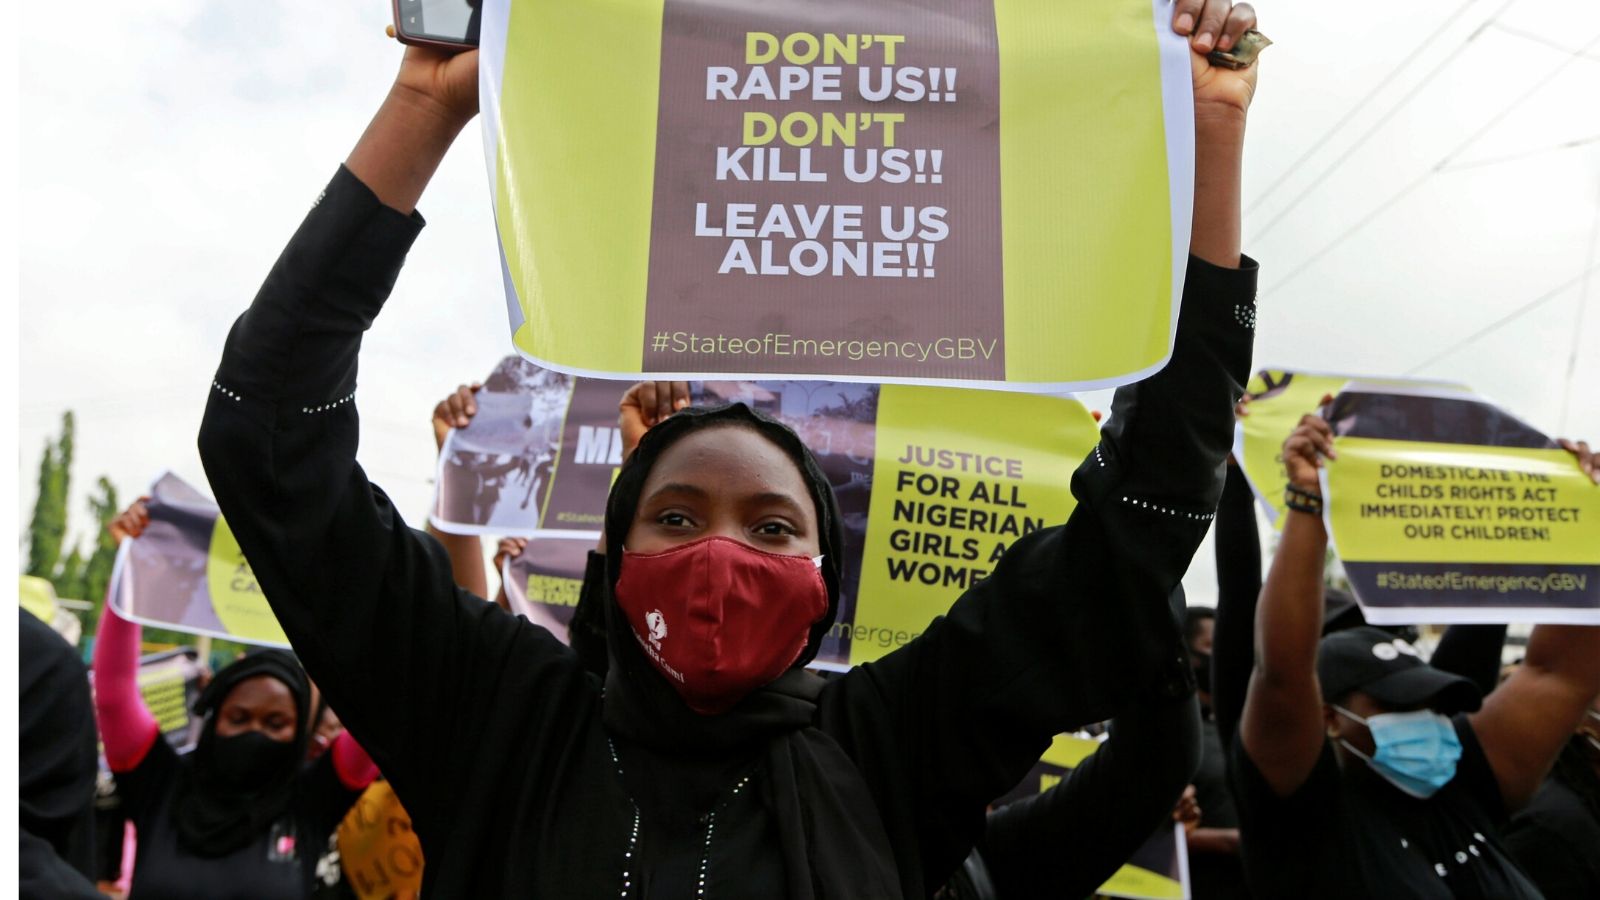 Protesters wearing face masks, carry banners as they stage a demonstration to raise awareness about sexual violence, in Abuja, Nigeria June 5, 2020. REUTERS/Afolabi Sotunde